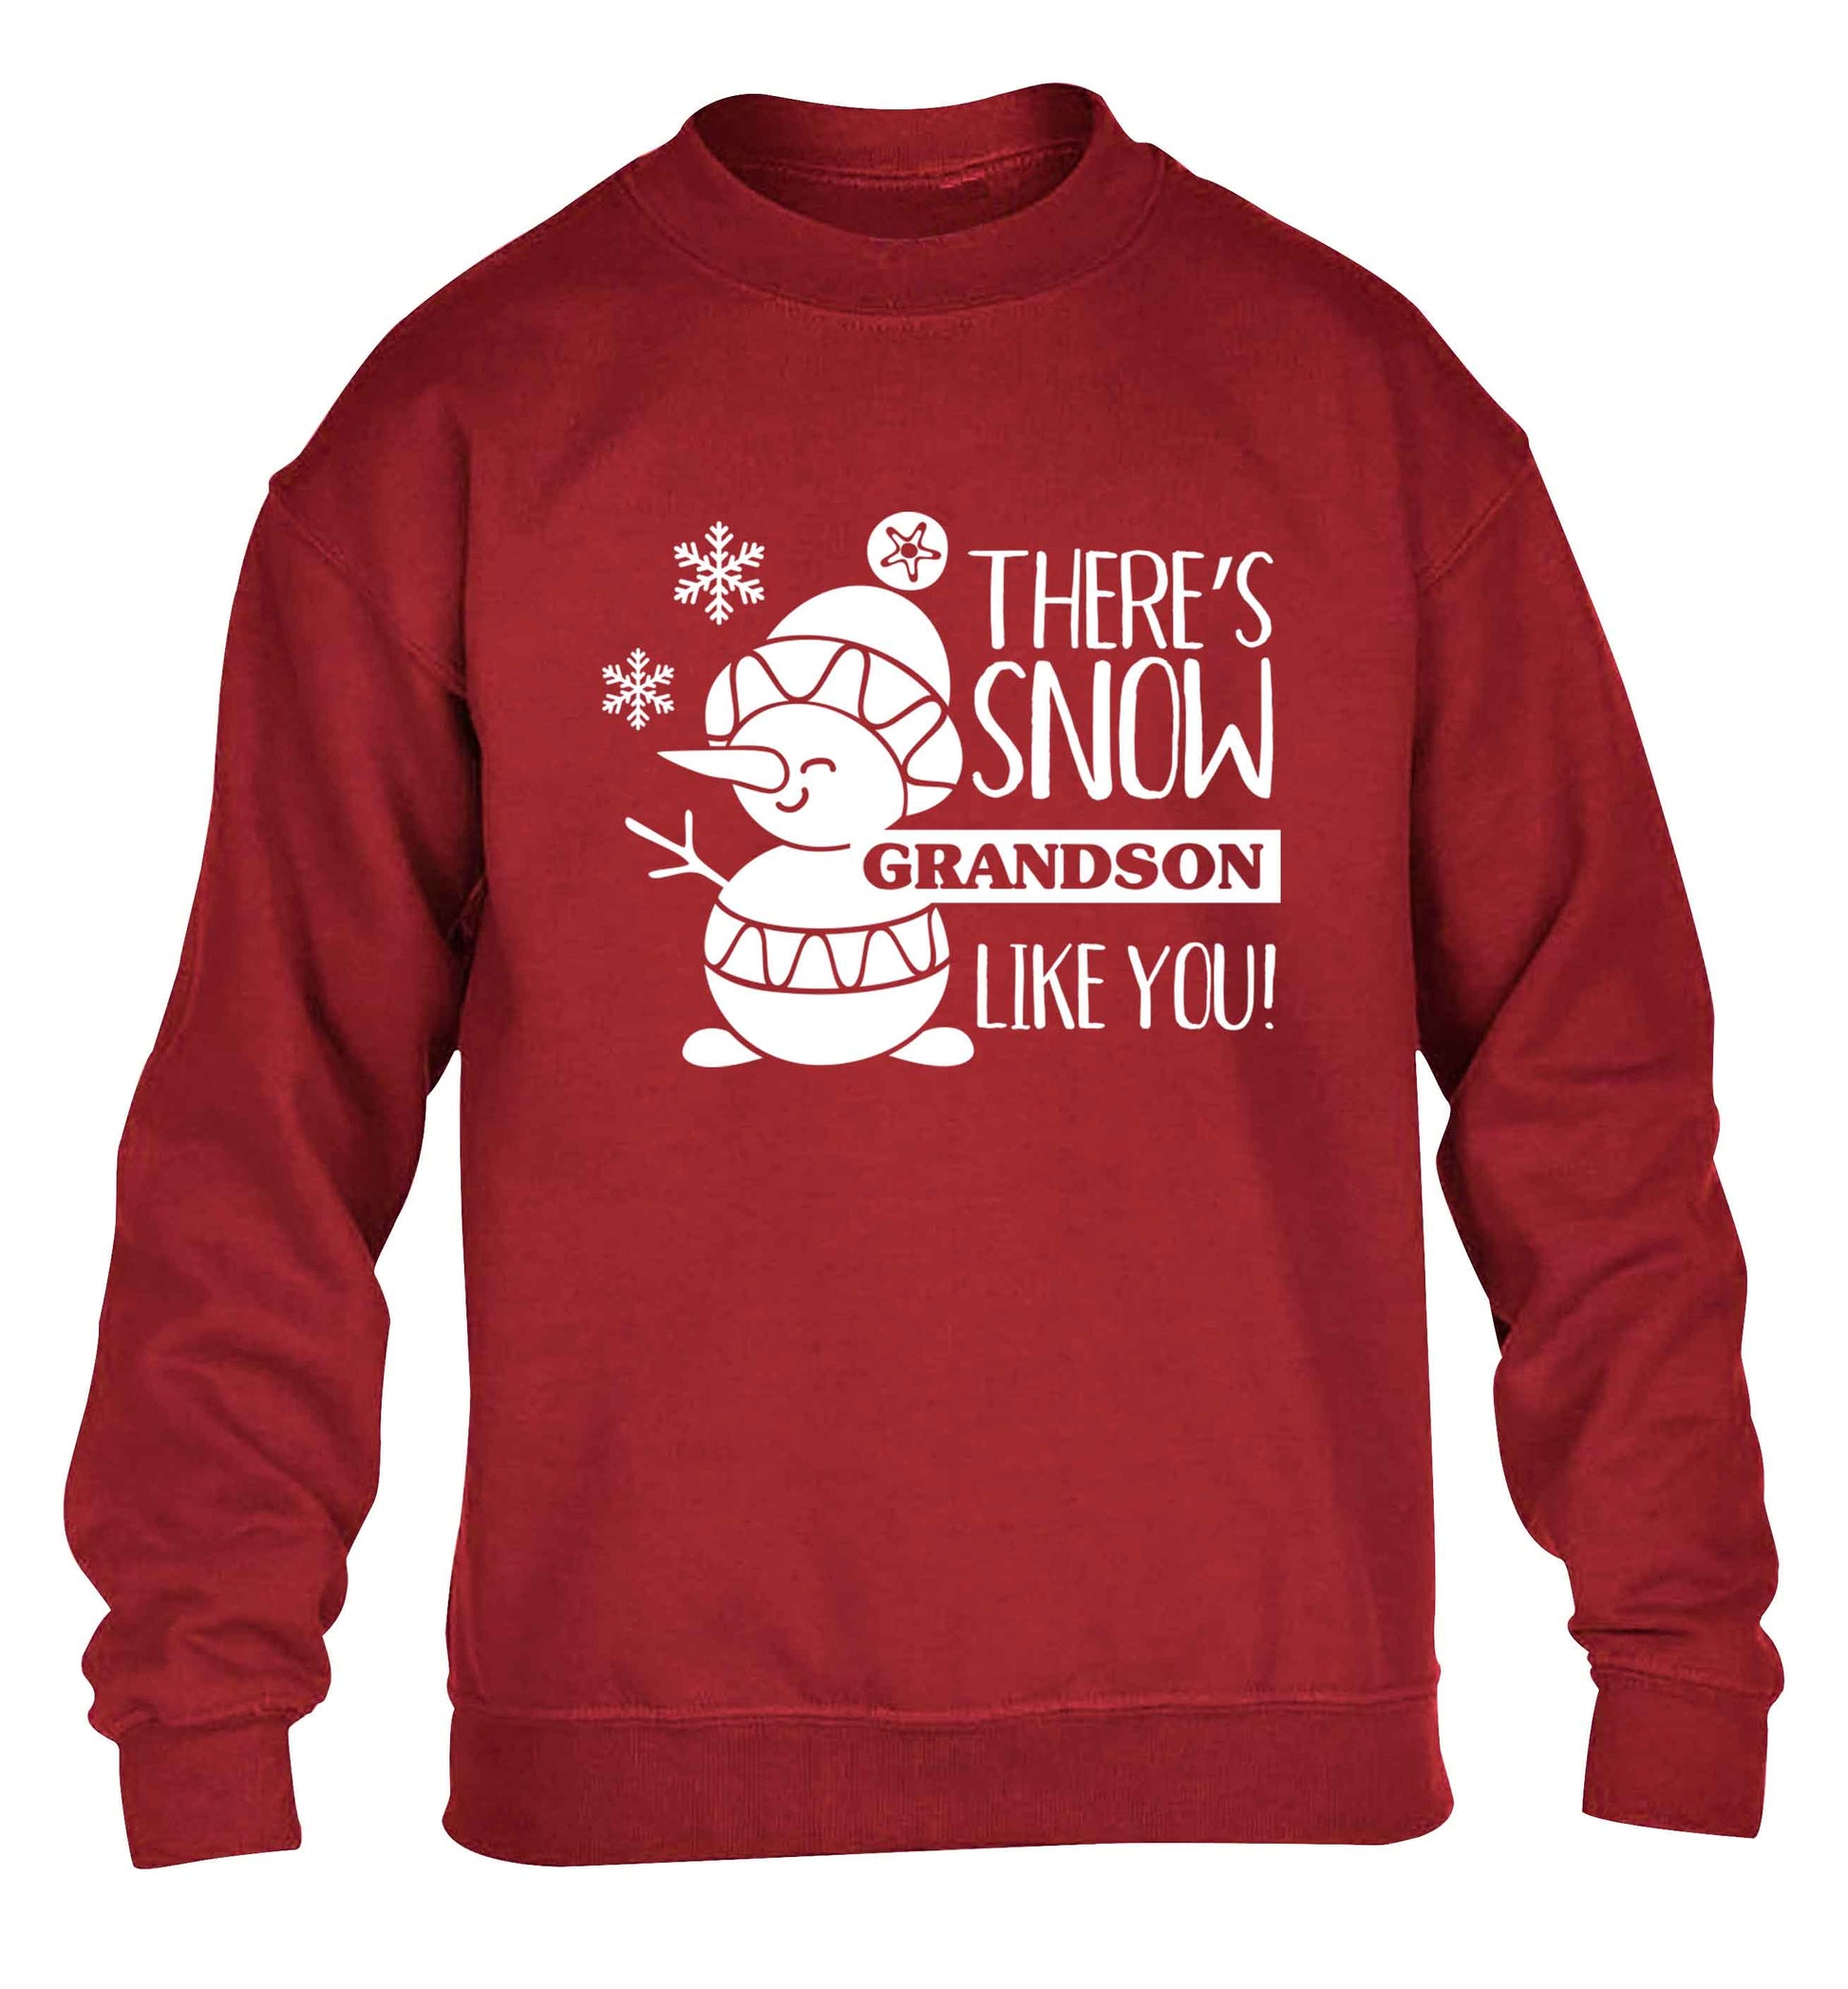 There's snow grandson like you children's grey sweater 12-13 Years